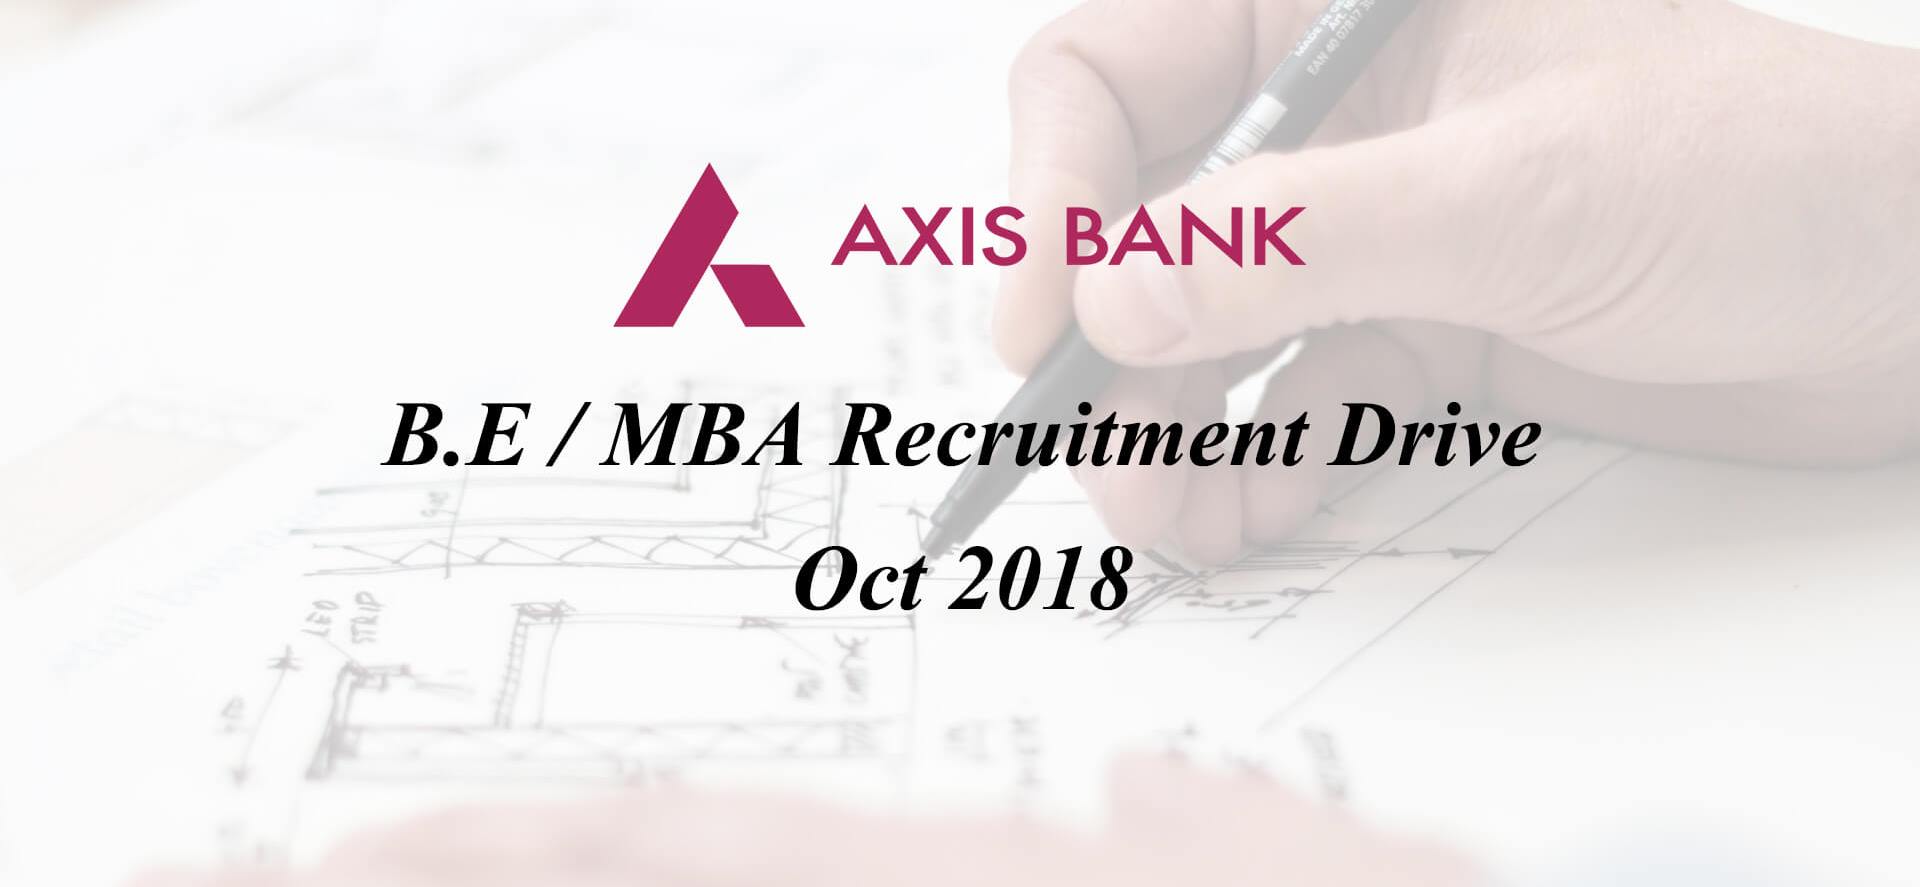 vtu axis bank recruitment drive for BE & MBA Oct 2018